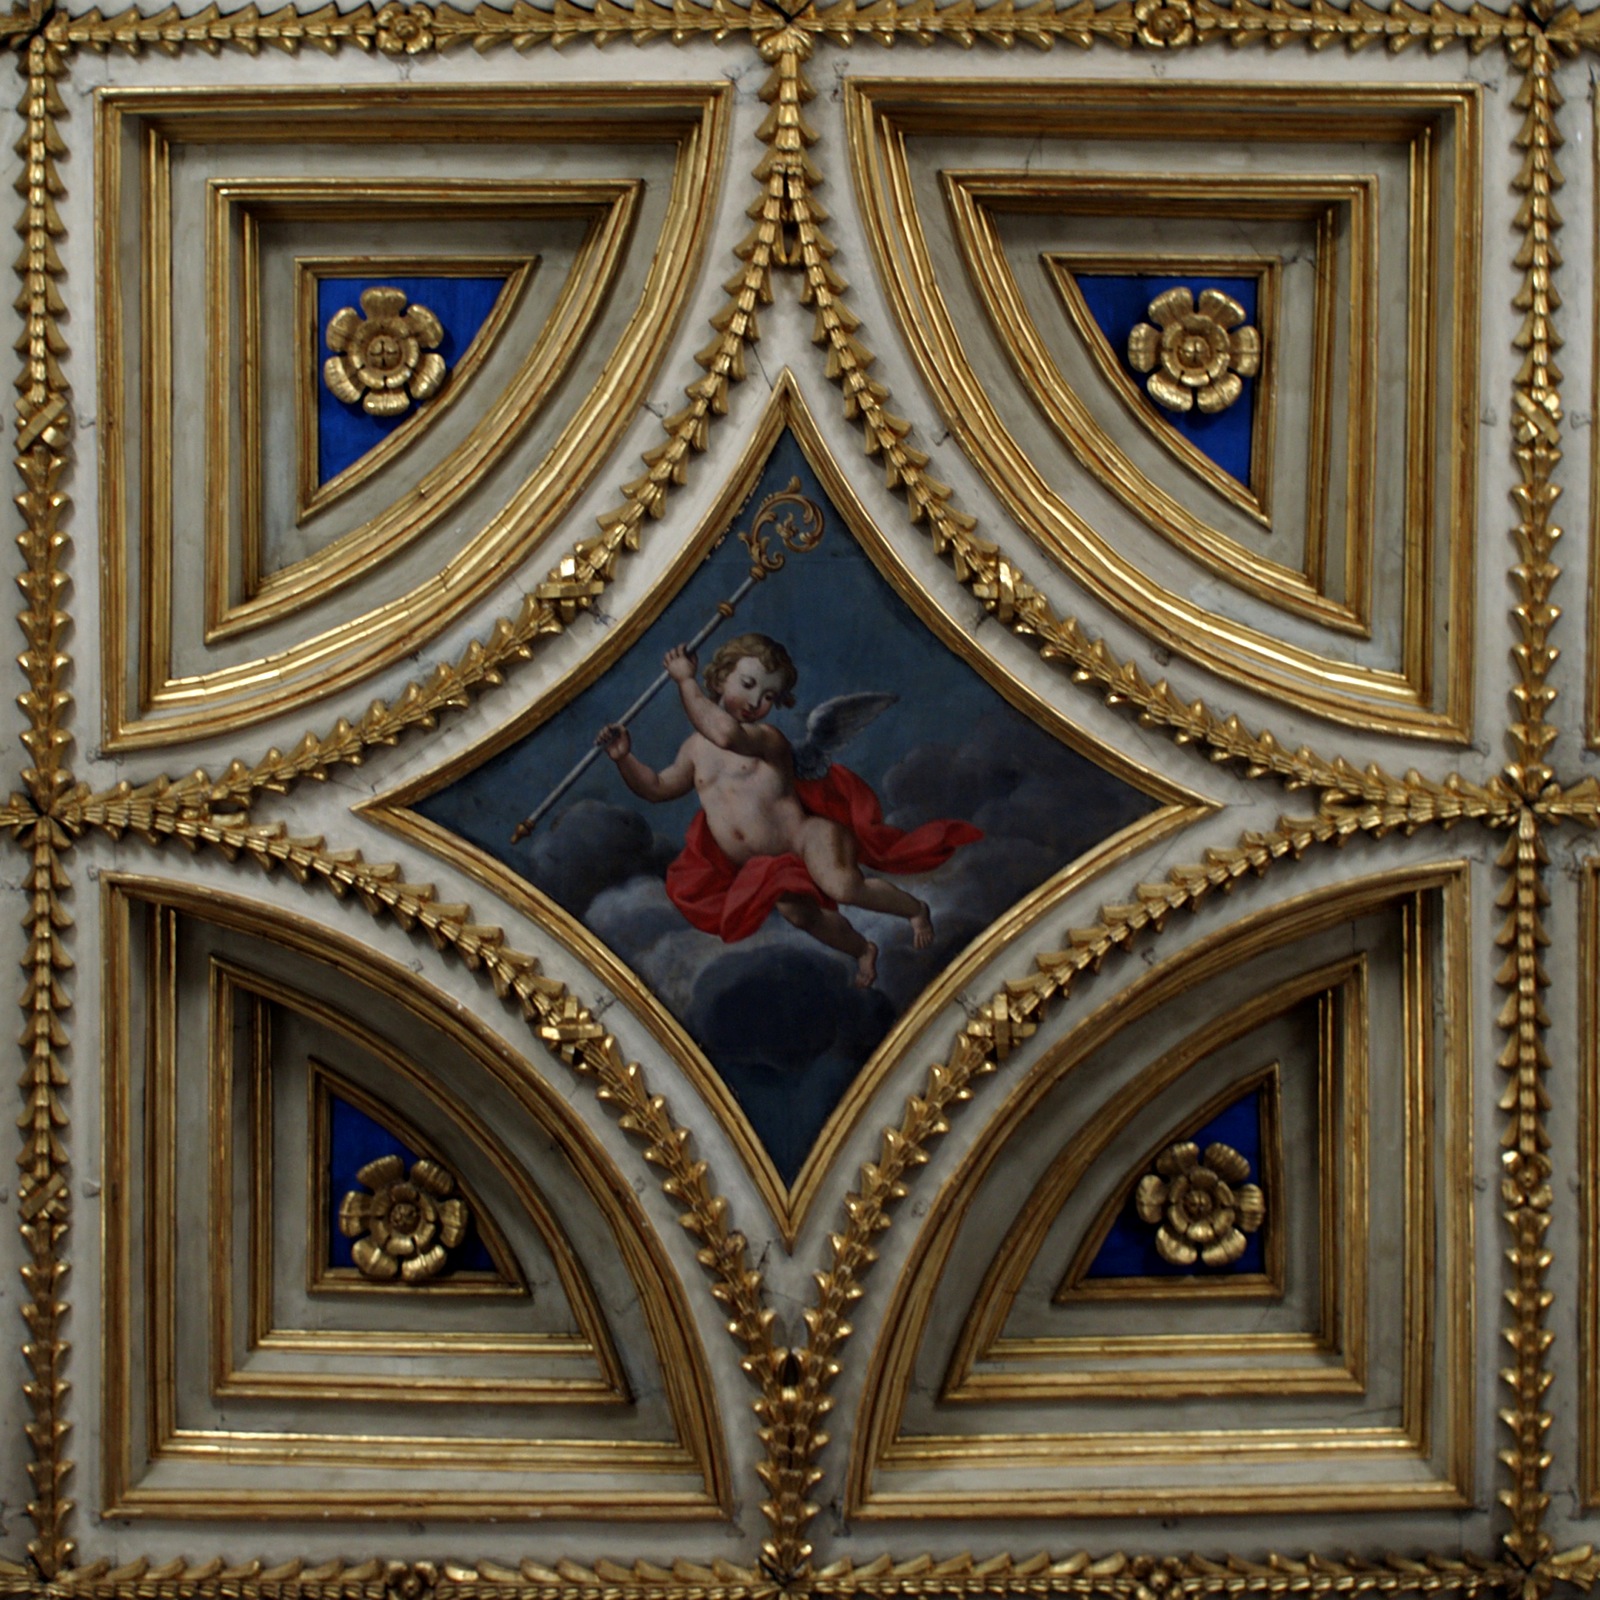 the golden painted ceiling of the cathedral shows a cherub